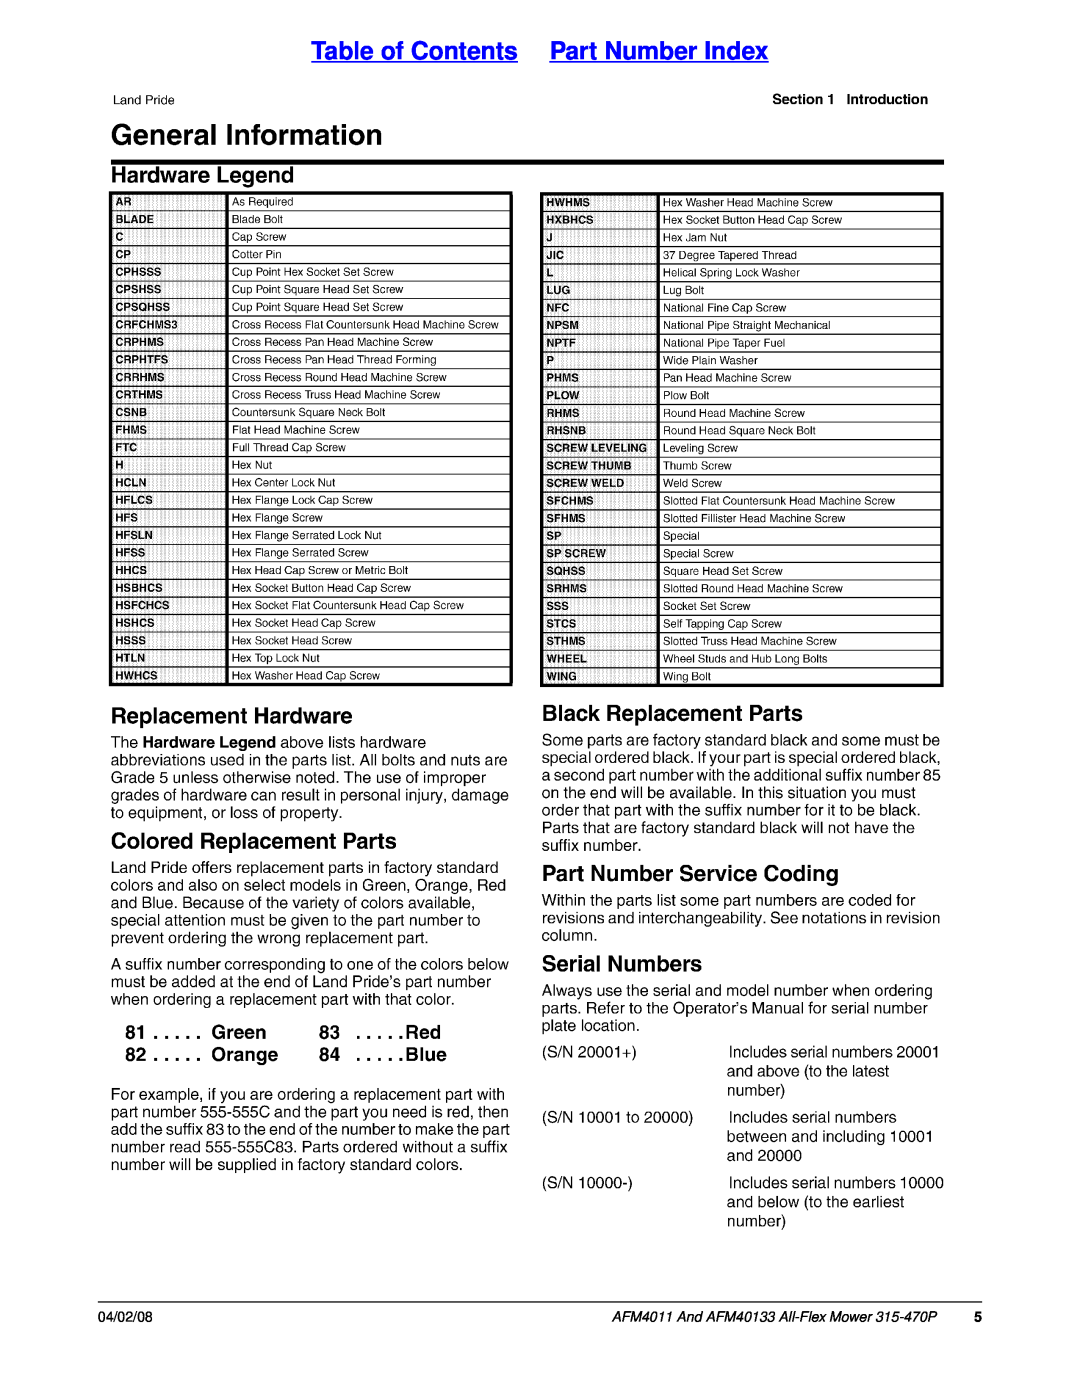 Land Pride manual Table of Contents Part Number Index, AFM4011 And AFM40133 All-FlexMower 315-470P, 04/02/08 